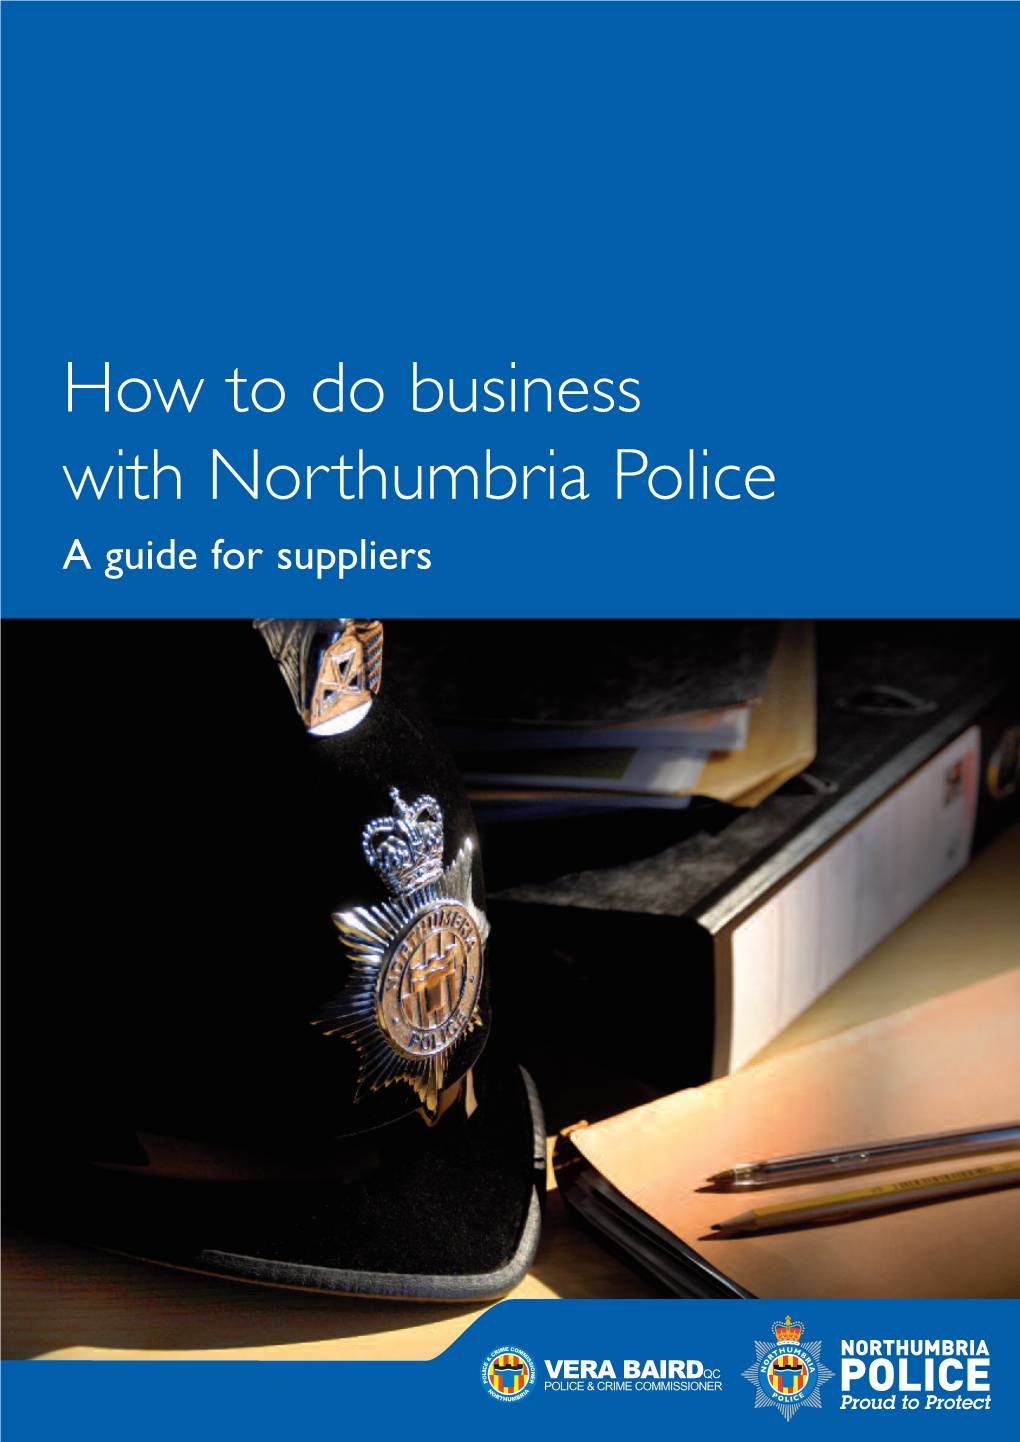 How to Do Business with Northumbria Police